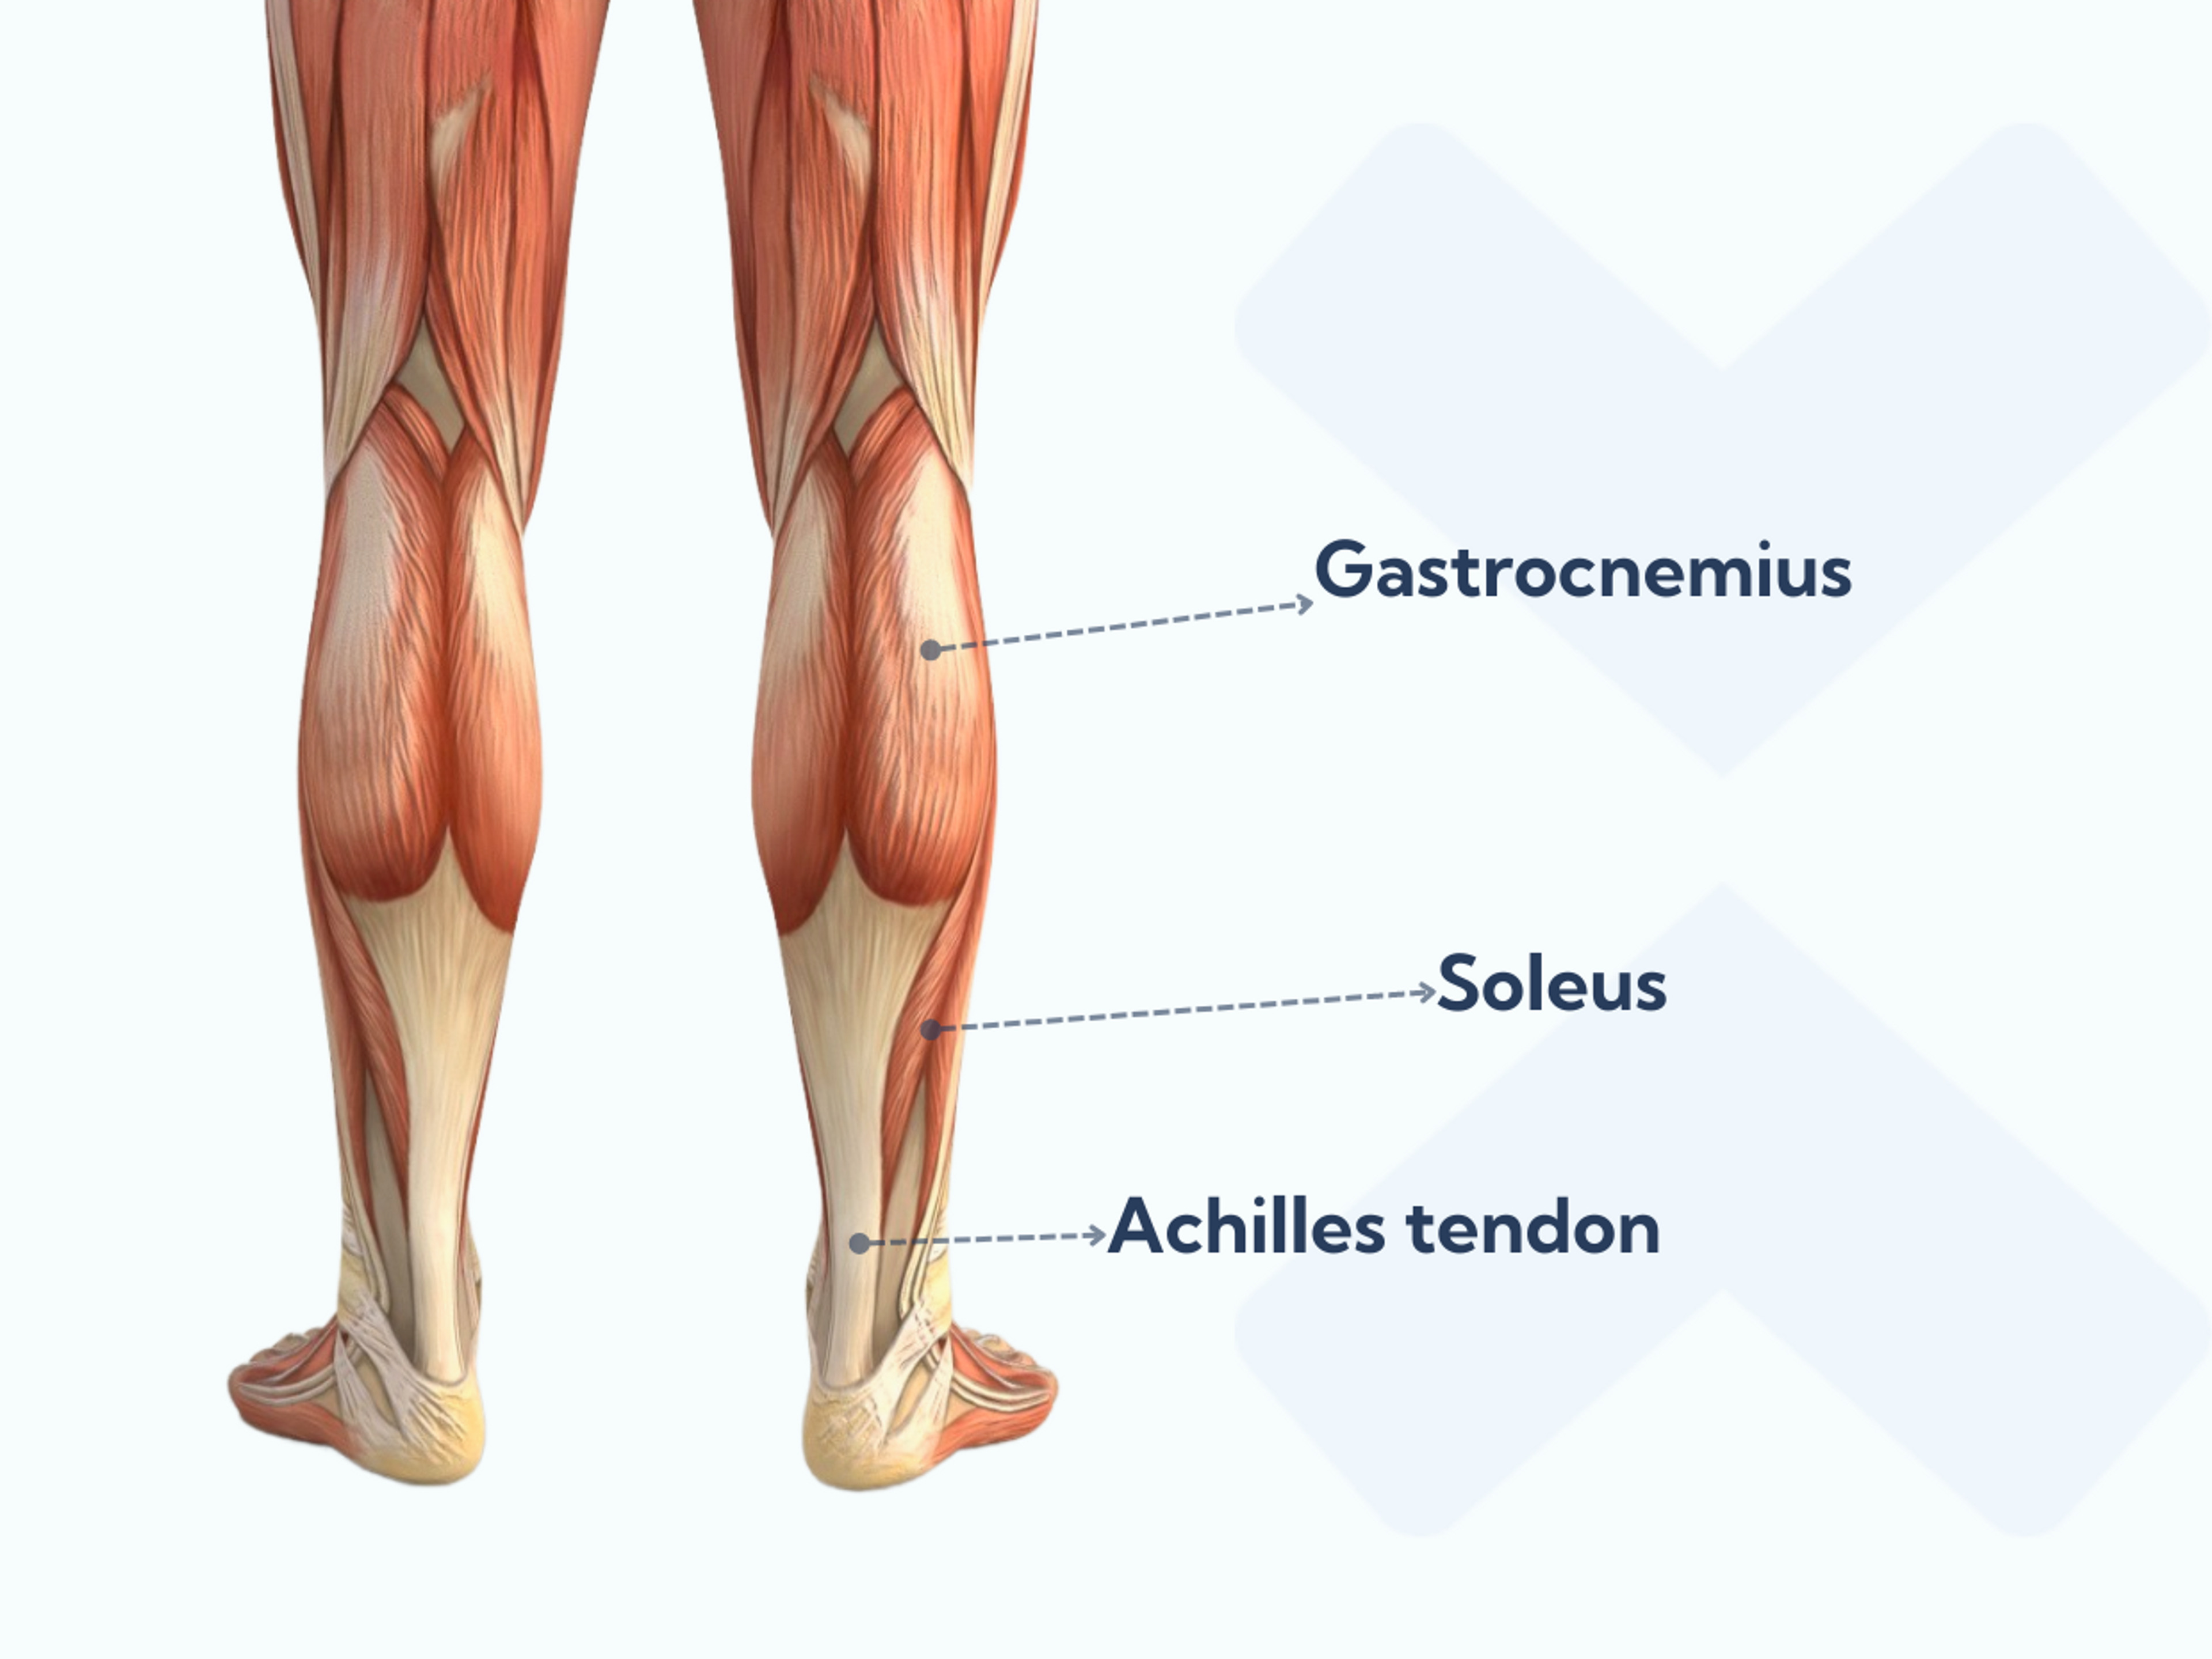 The anatomy of the calf muscles: Gastrocnemius muscle, soleus muscle, Achilles tendon.